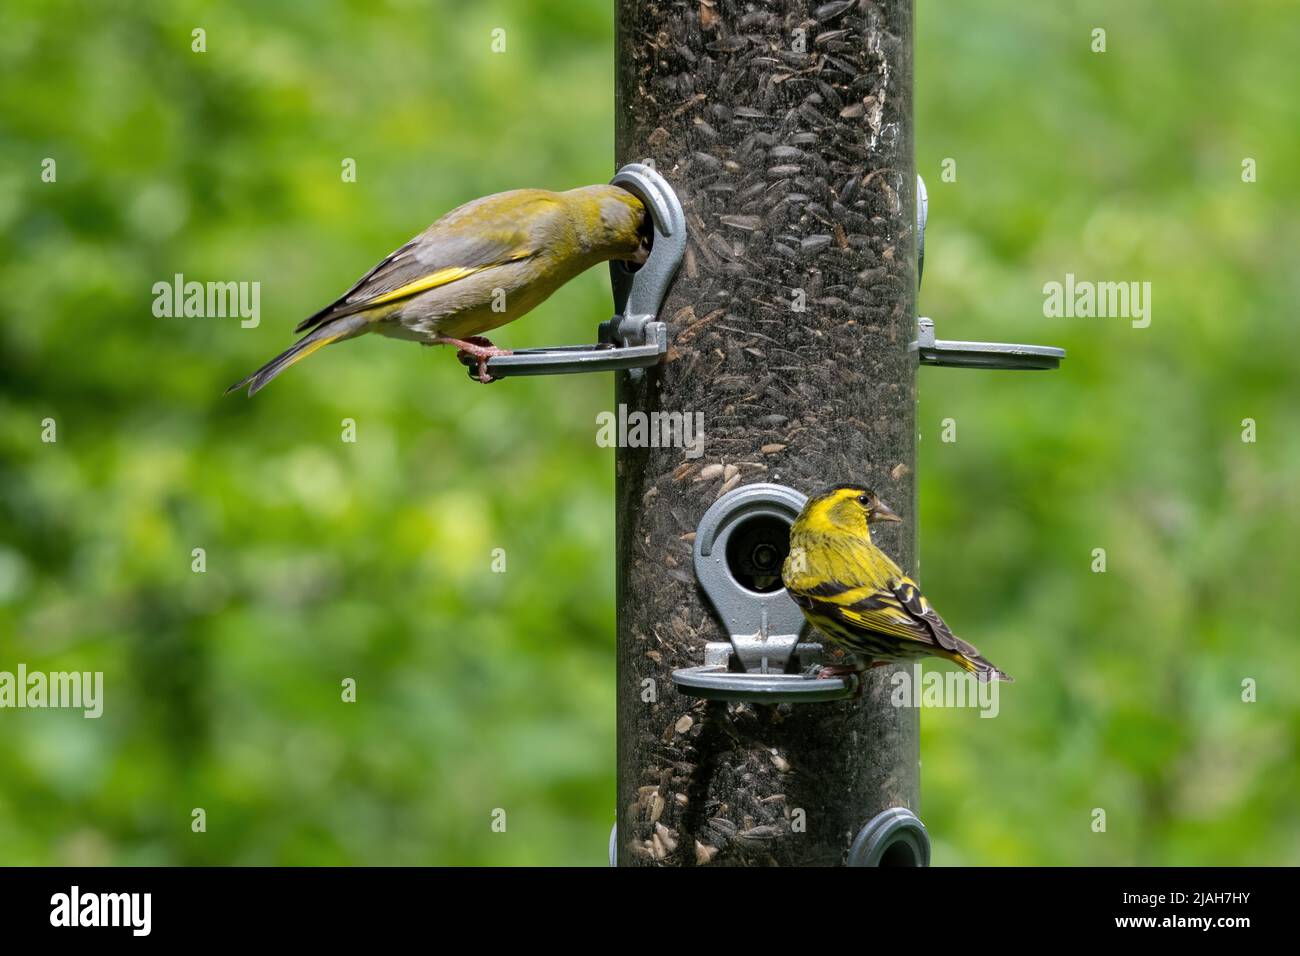 A greenfinch (Chloris chloris) and a siskin (Spinus spinus) feeding on sunflowers on a bird feeder, Hampshire, England, UK Stock Photo